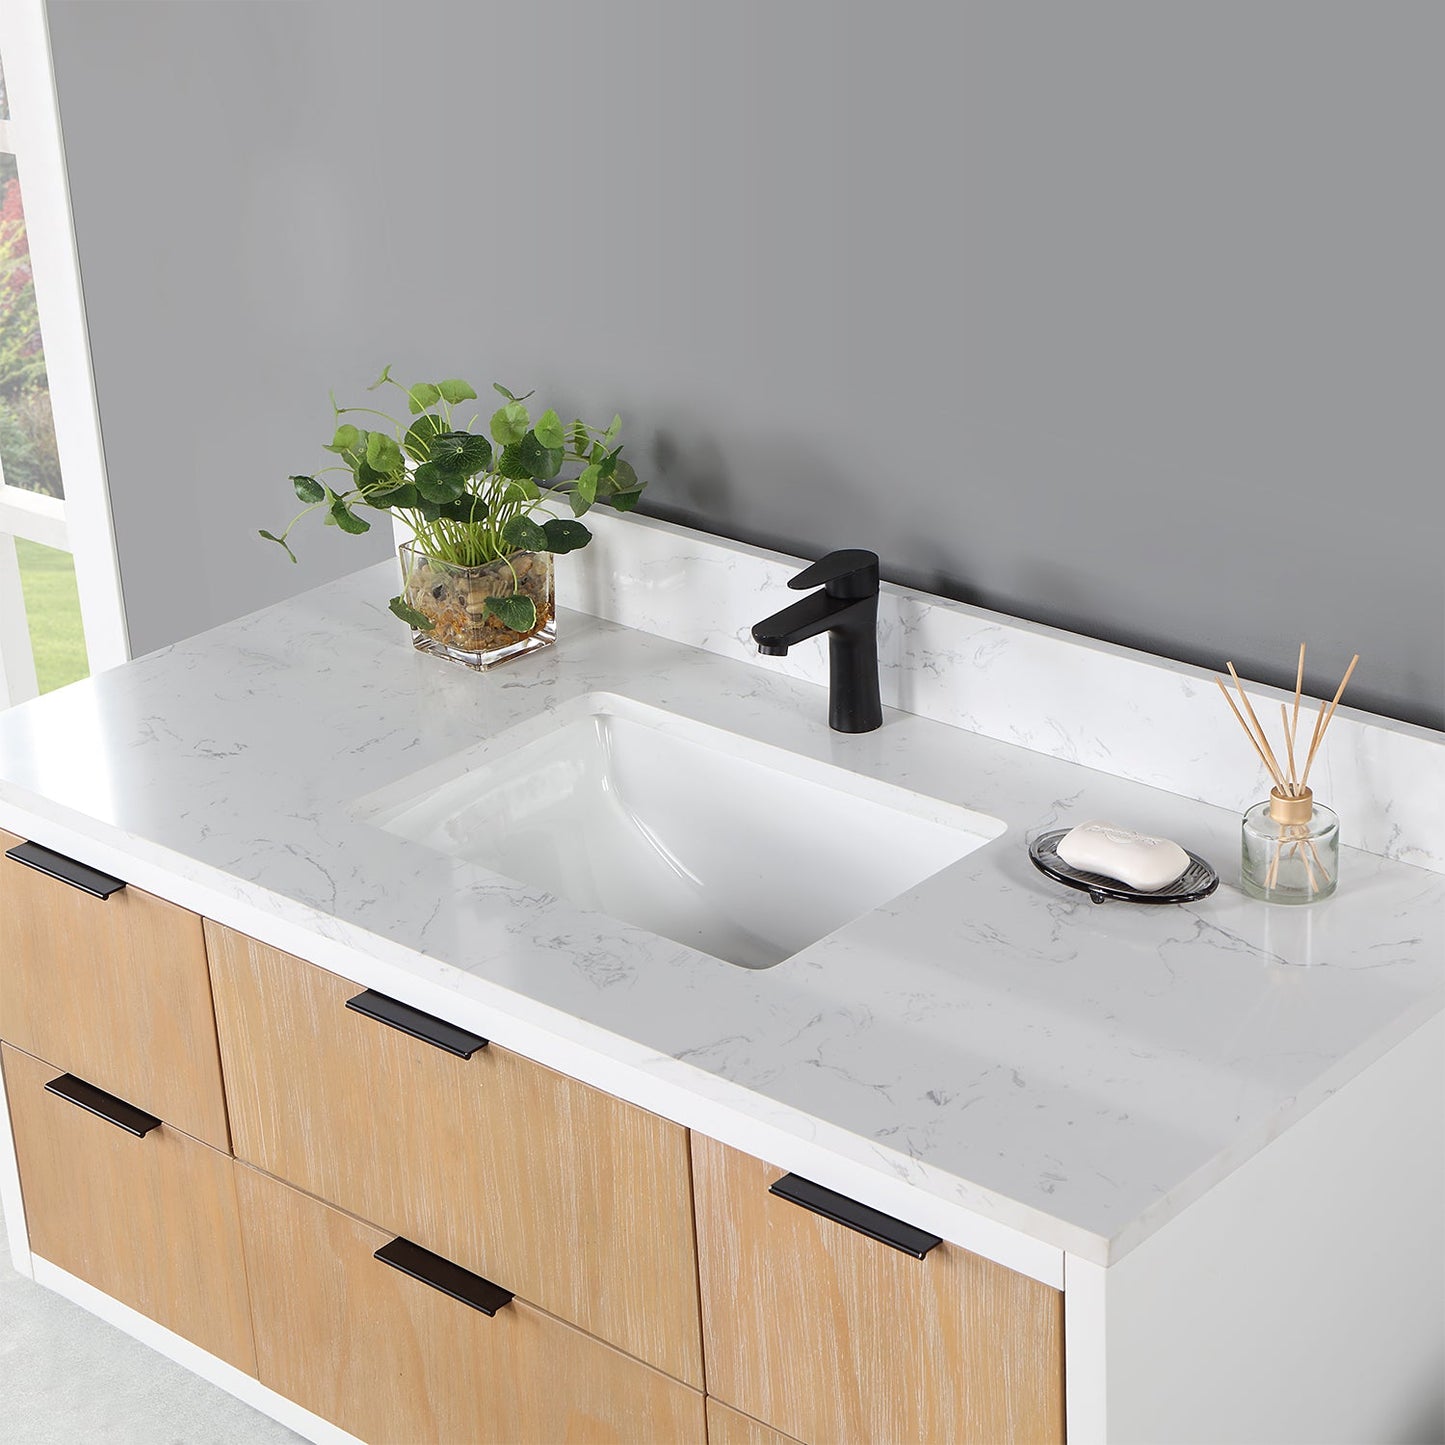 Dione 48" Single Bathroom Vanity in Weathered Pine with Carrara White Composite Stone Countertop without Mirror